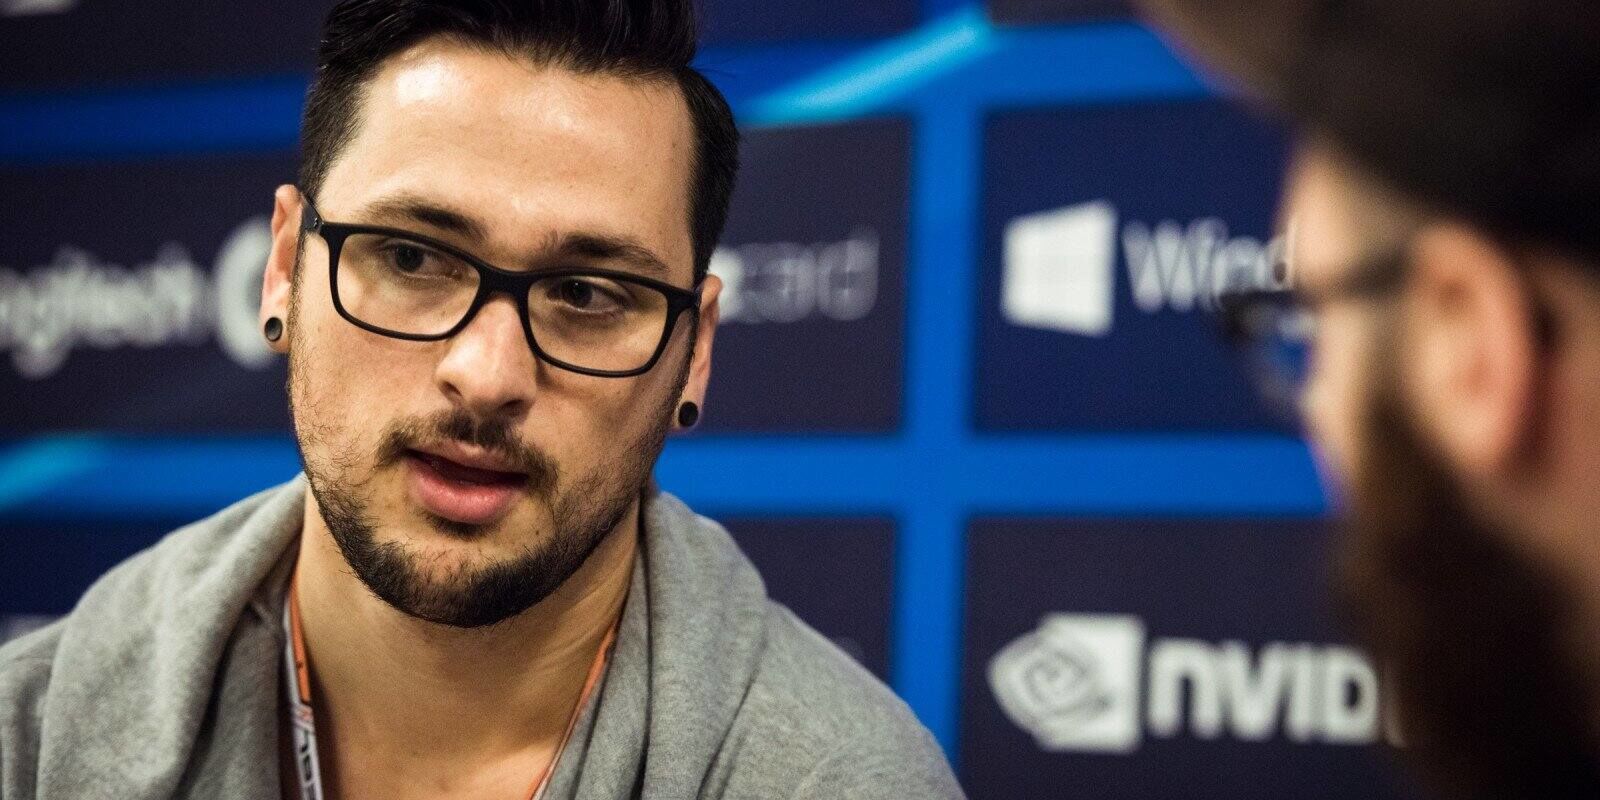 Caster Sadokist suspended from covering IEM Rio Major 2022